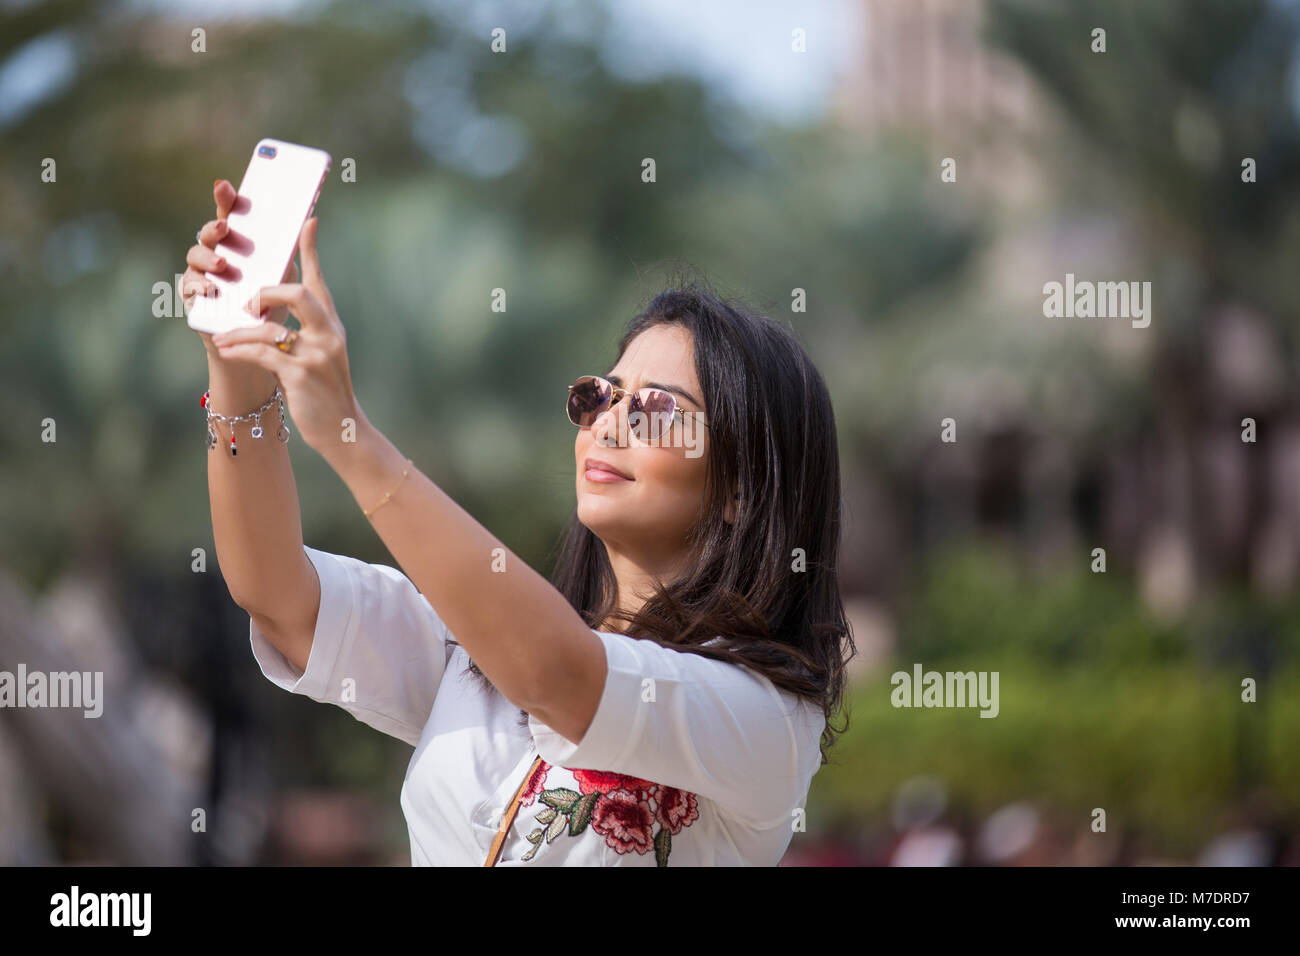 Beautiful woman taking a selfie picture with a mobile phone at Madinat Jumeirah Dubai UAE Stock Photo